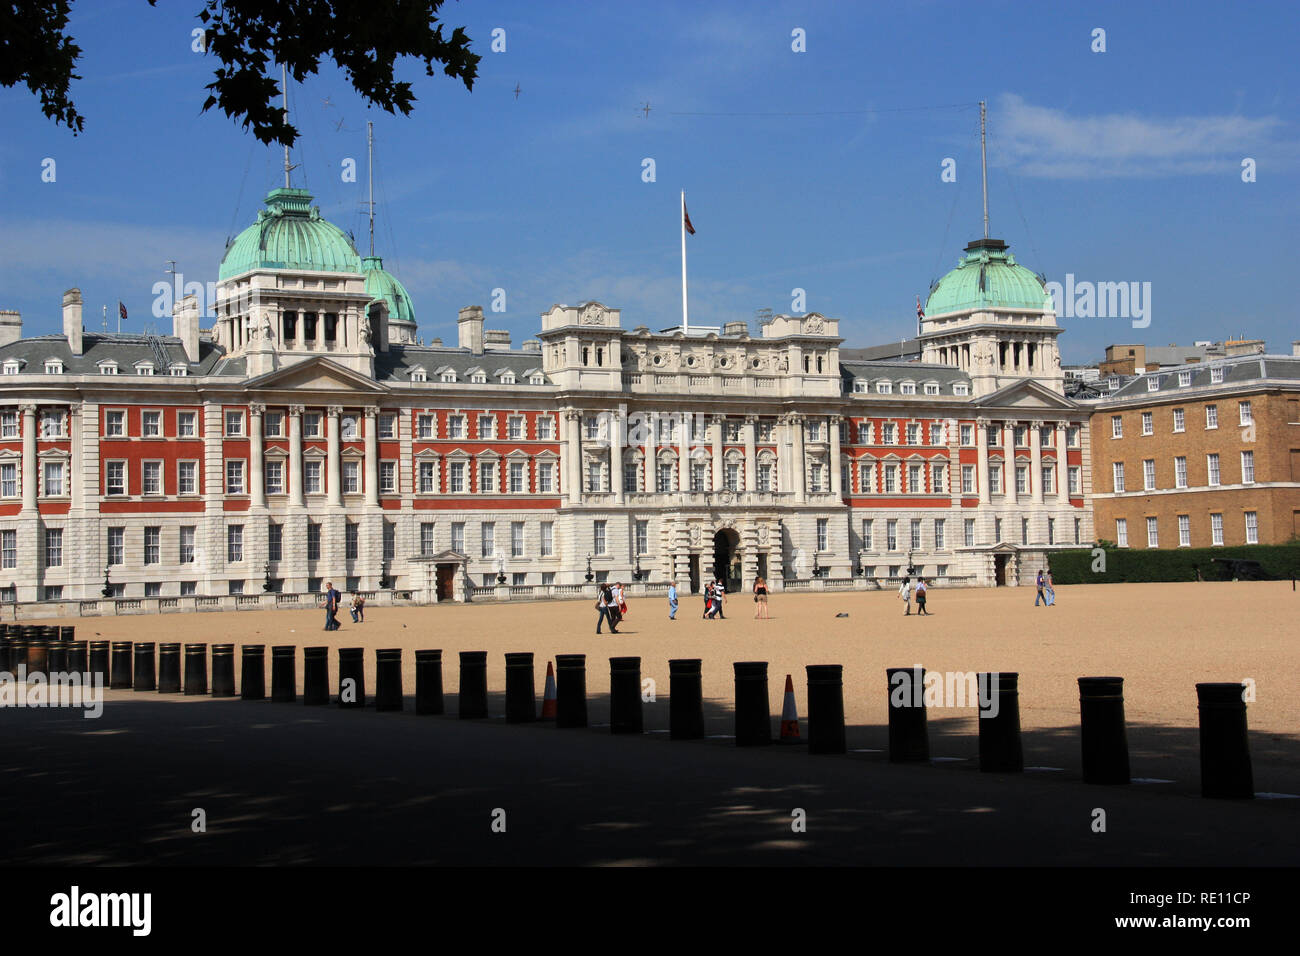 Admiralty Extension and mid-18th century Horse Guards viewed across Horse Guards Parade in London, United Kingdom Stock Photo